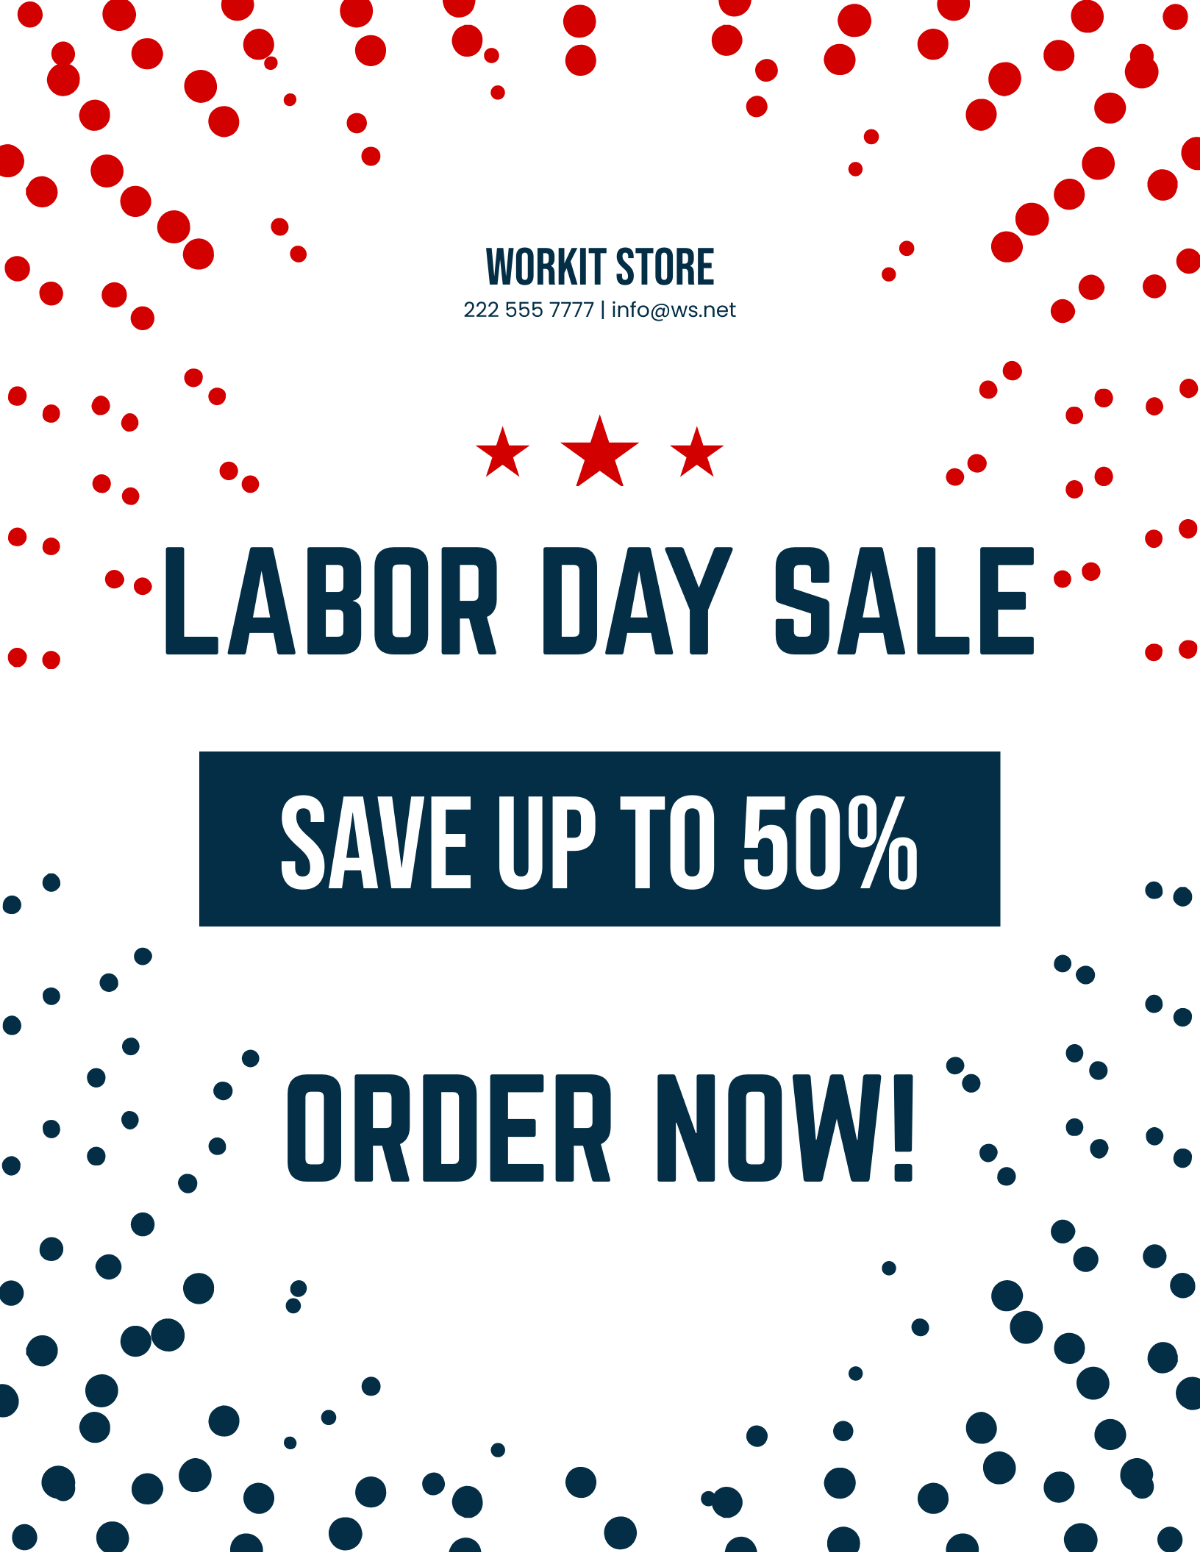 Labor Day Advertising Flyer Template